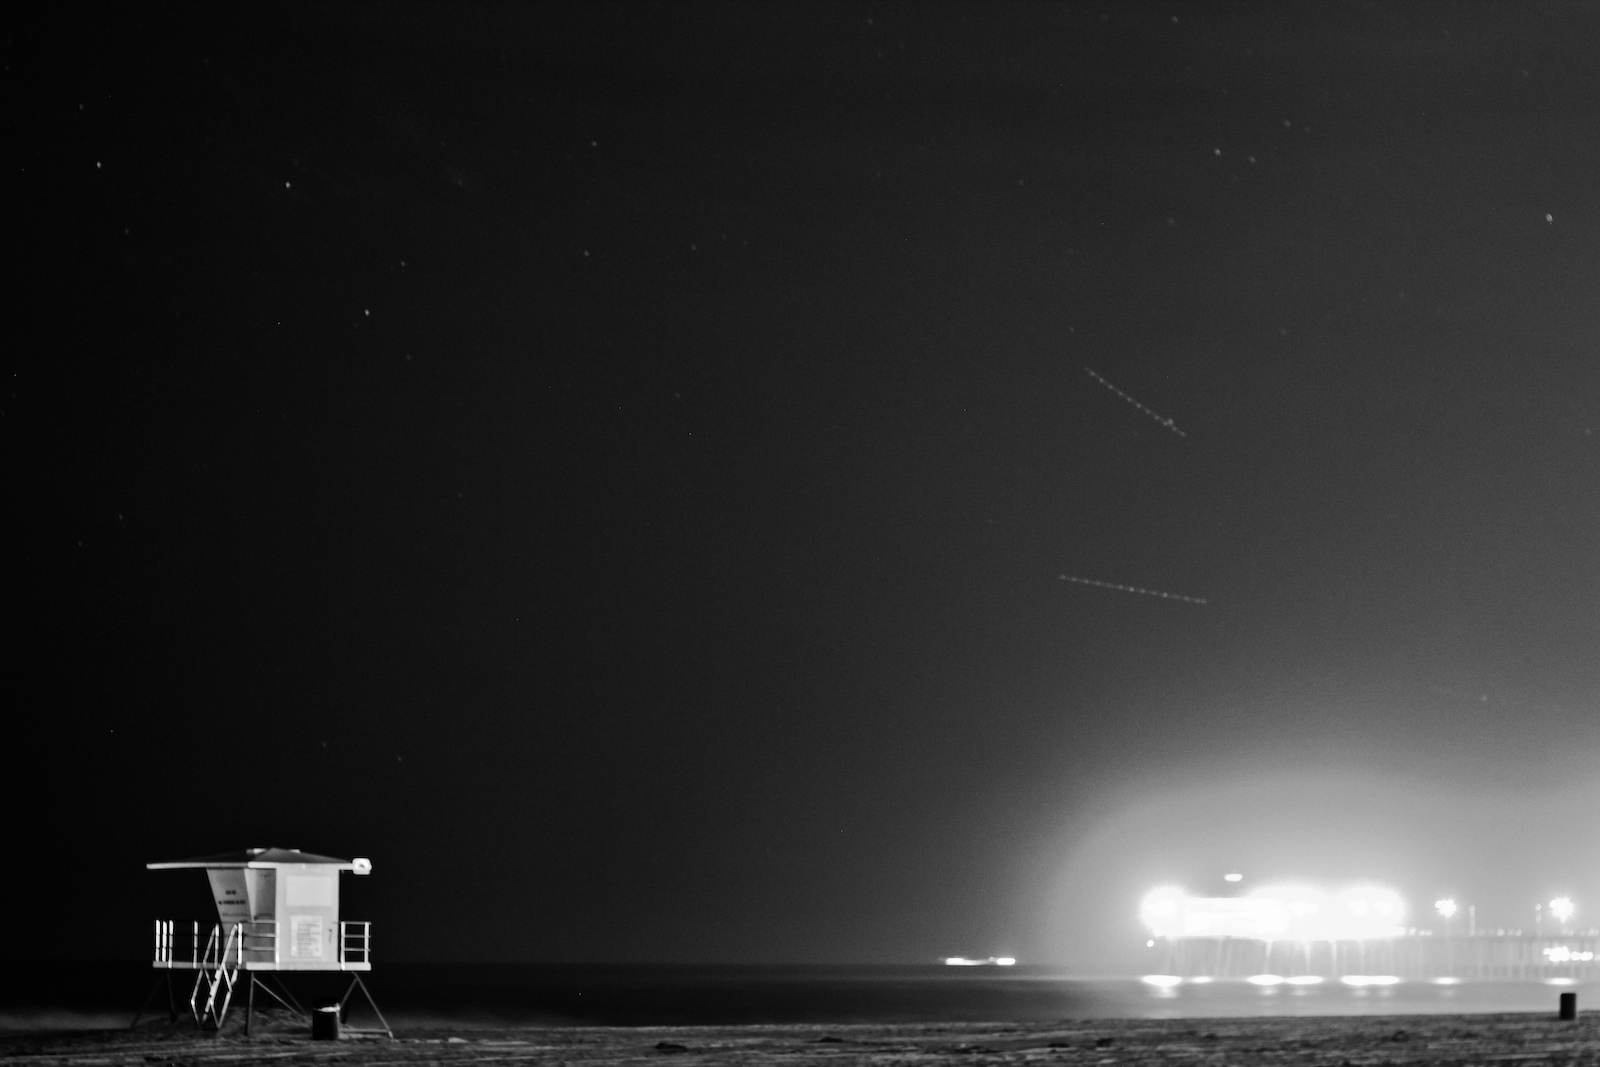 Huntington Beach and Pair looking sweet at night in black &amp; white.